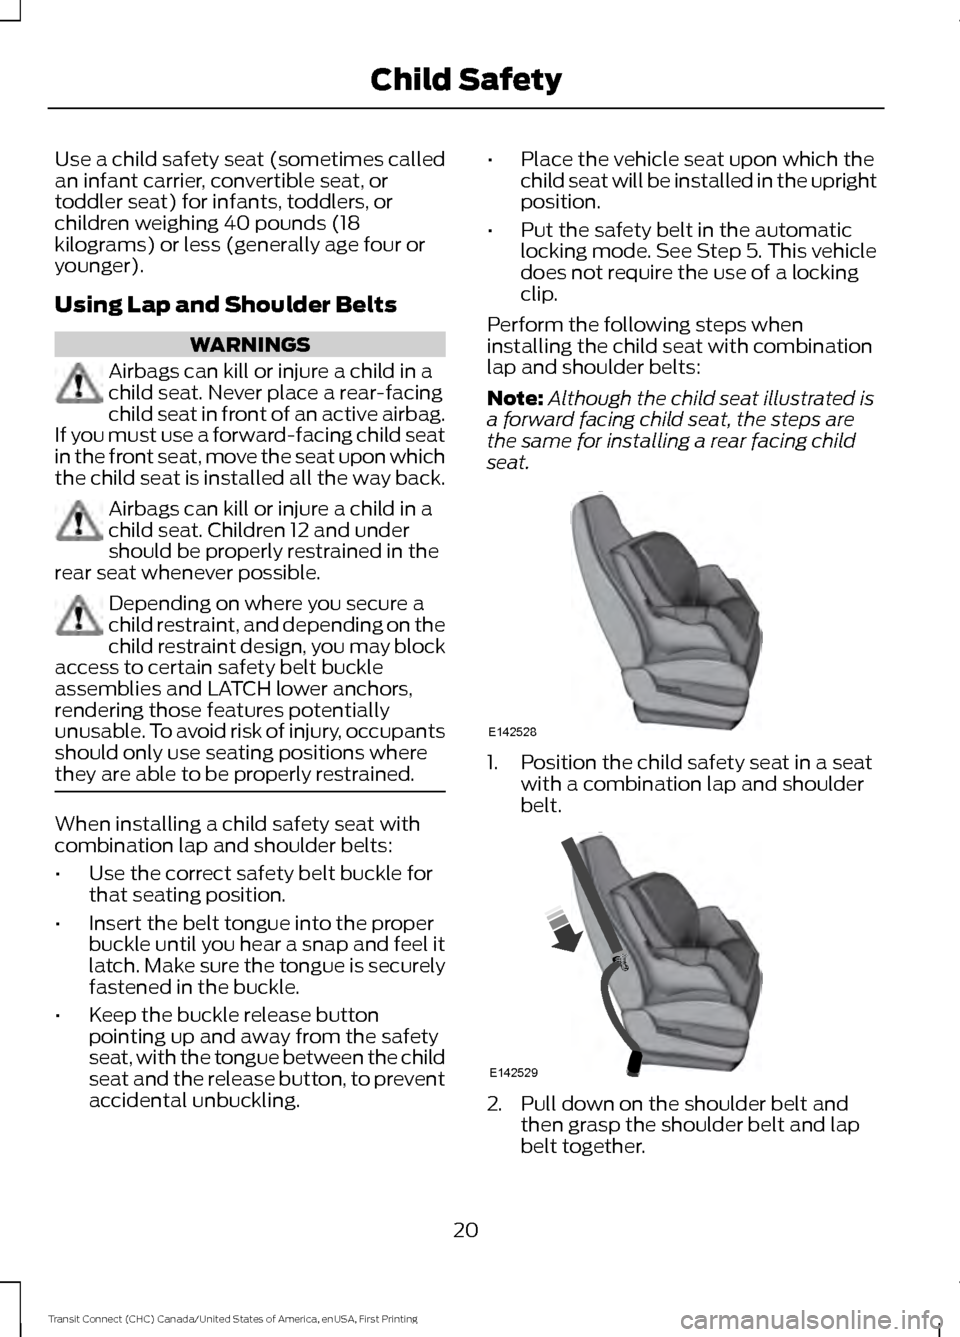 FORD TRANSIT CONNECT 2015 2.G Owners Manual Use a child safety seat (sometimes called
an infant carrier, convertible seat, or
toddler seat) for infants, toddlers, or
children weighing 40 pounds (18
kilograms) or less (generally age four or
youn